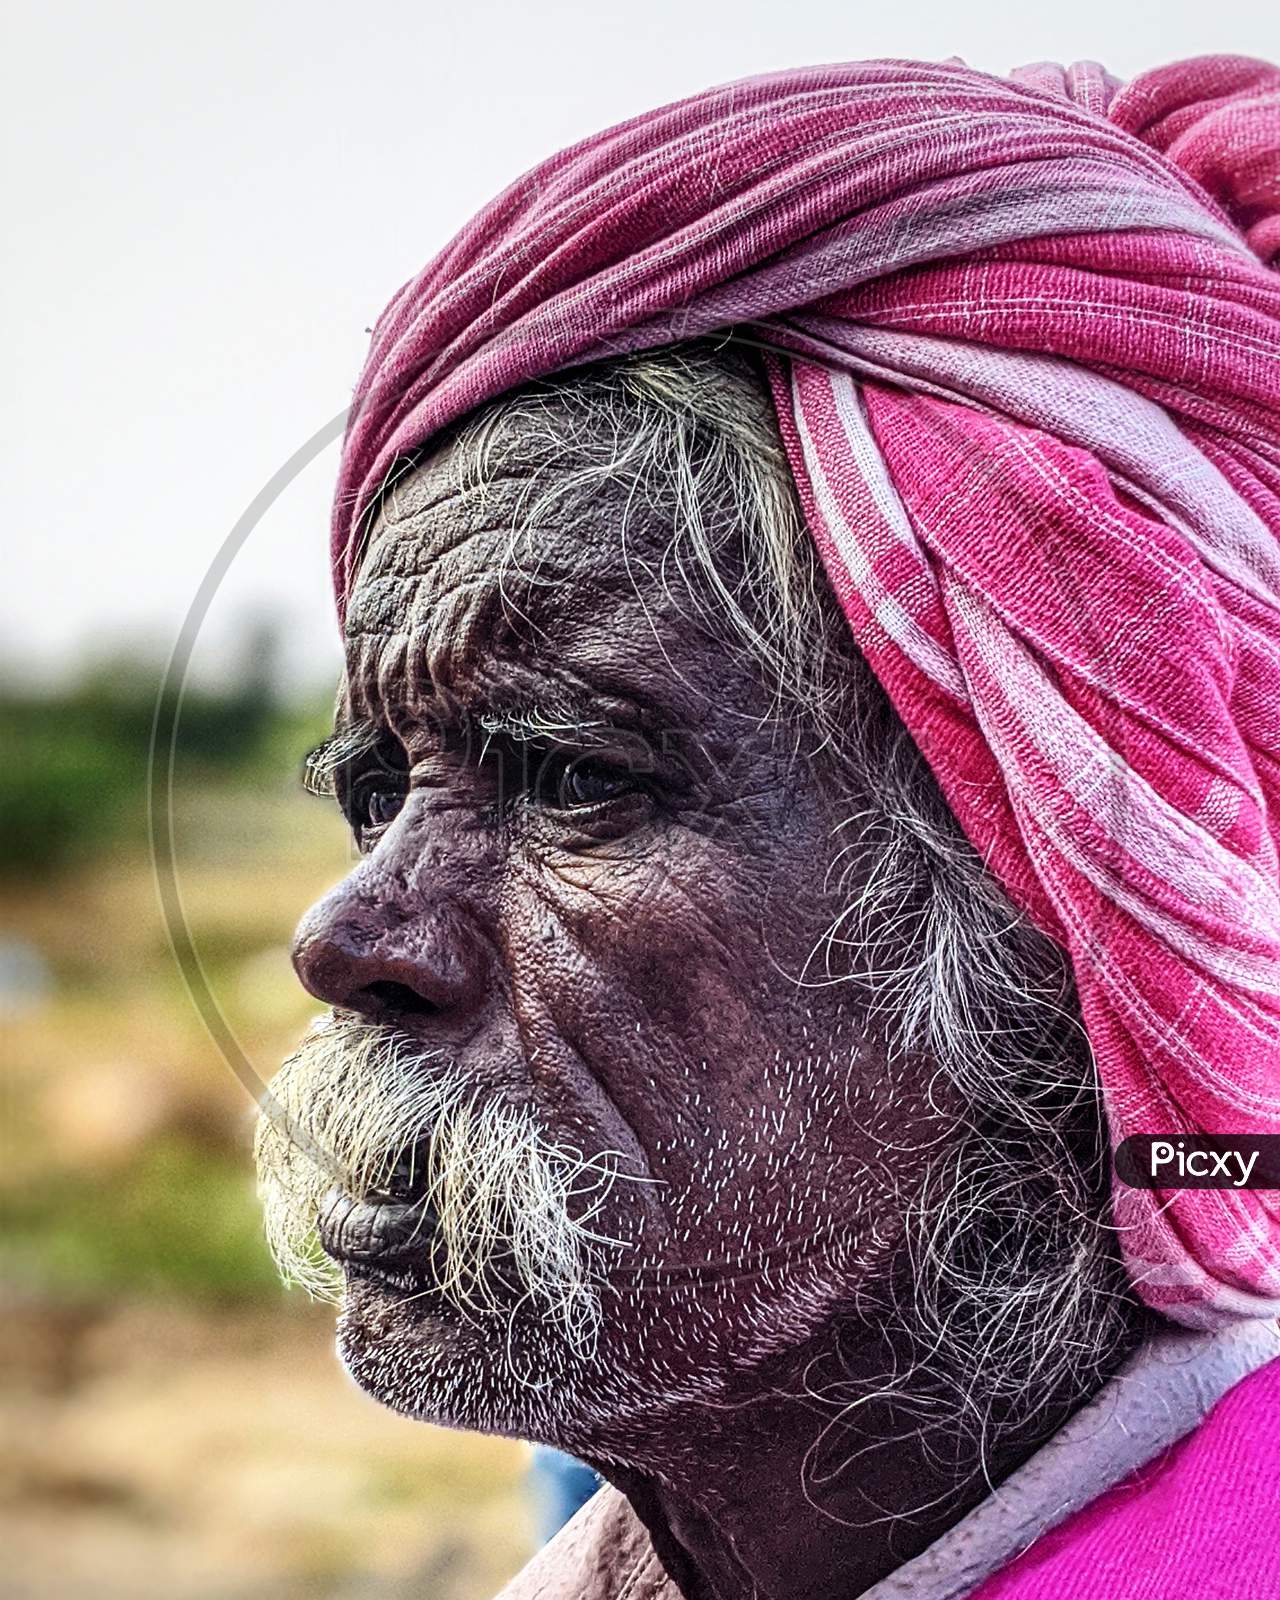 Portrait Of an Indian Old Man